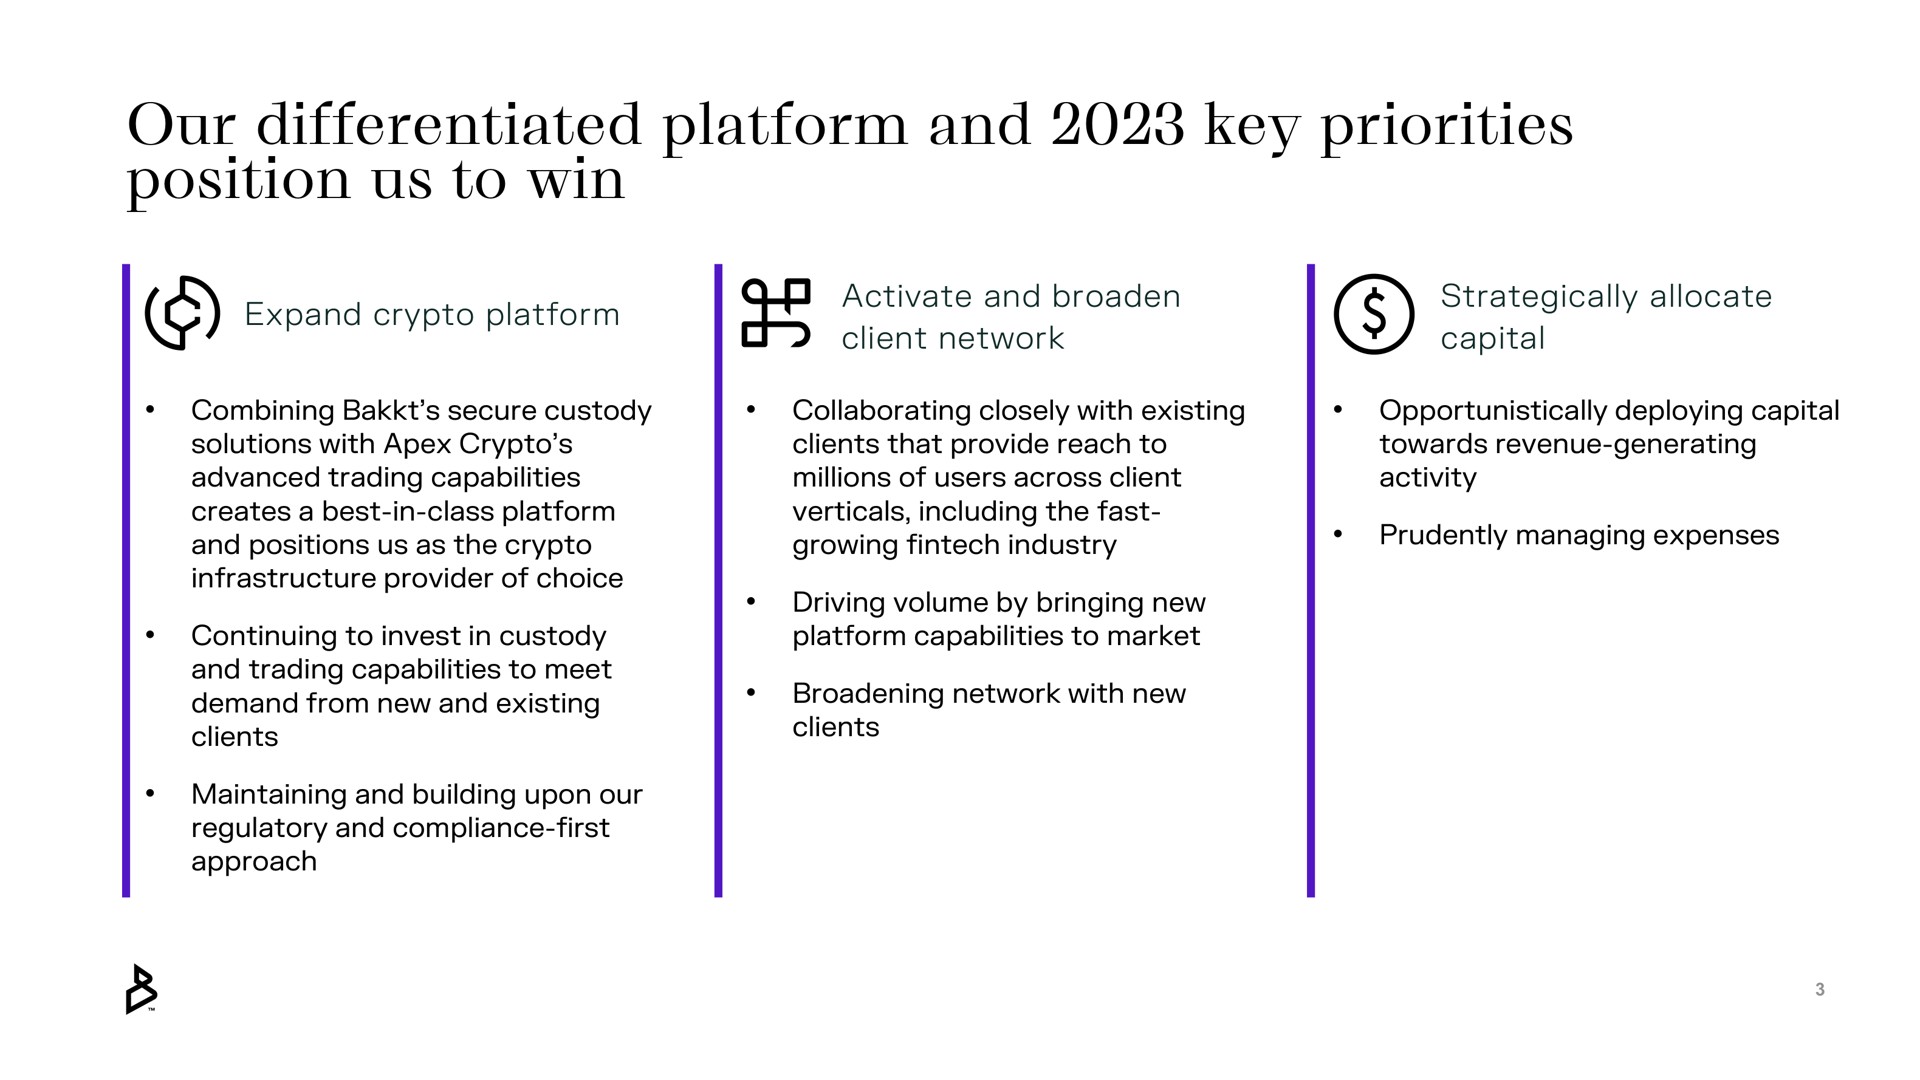 our differentiated platform and key priorities position us to win | Bakkt